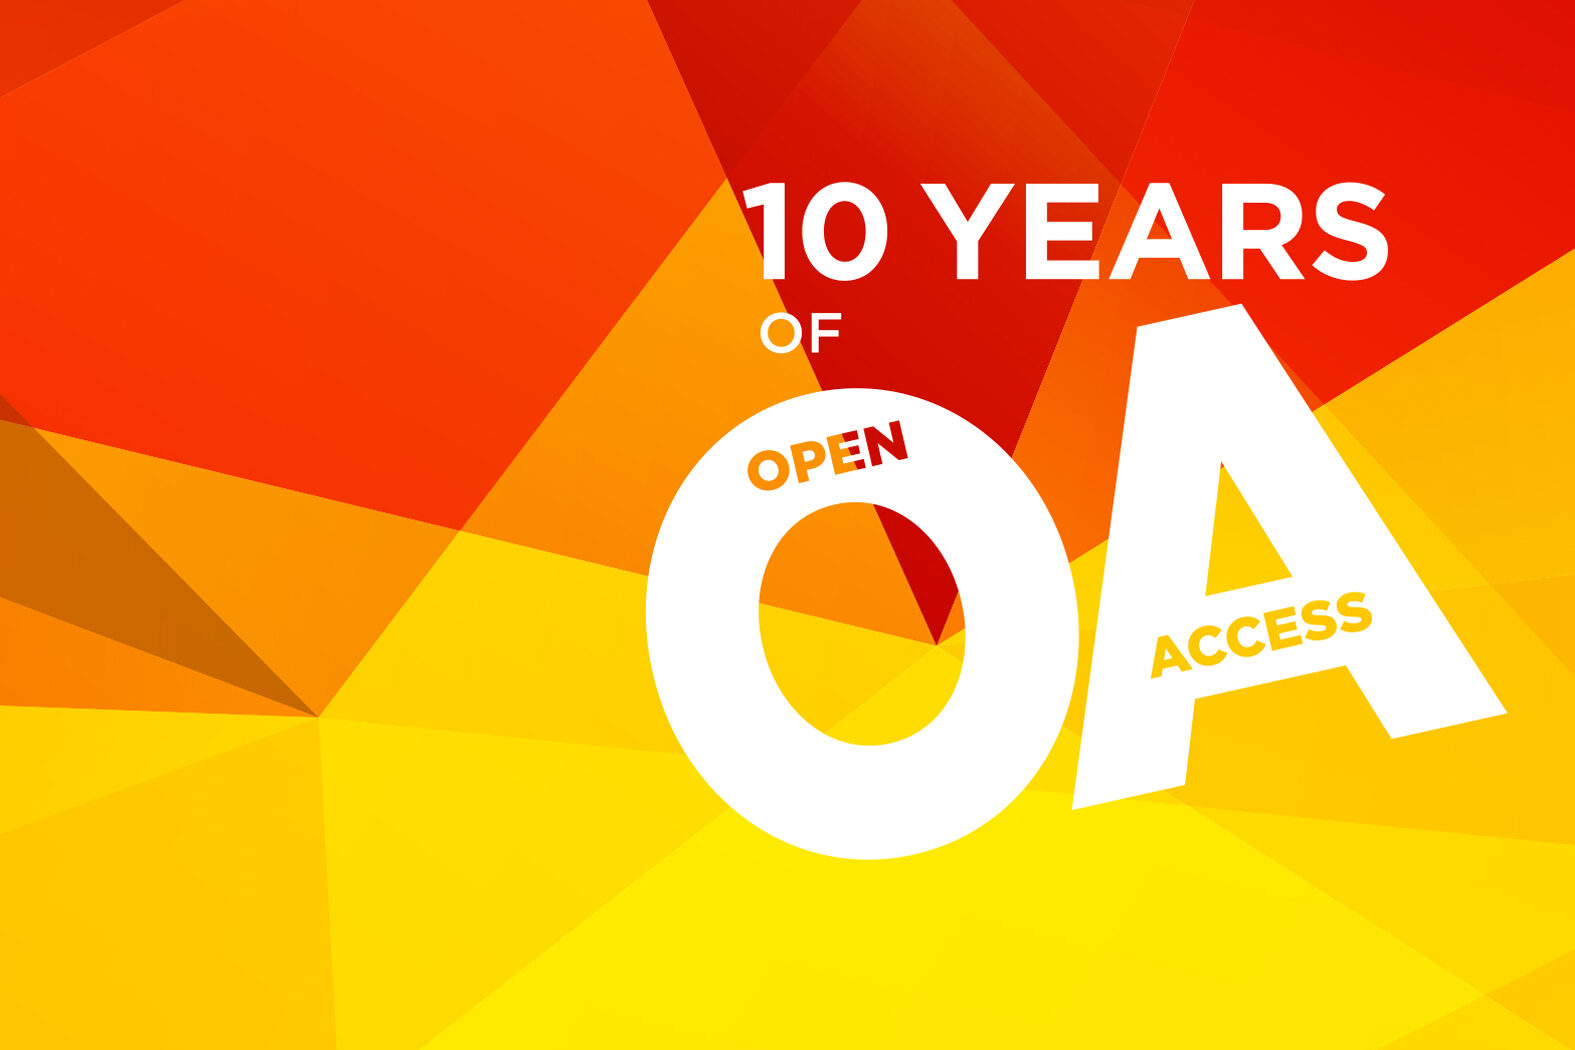 Celebrating 10 Years of Open Access